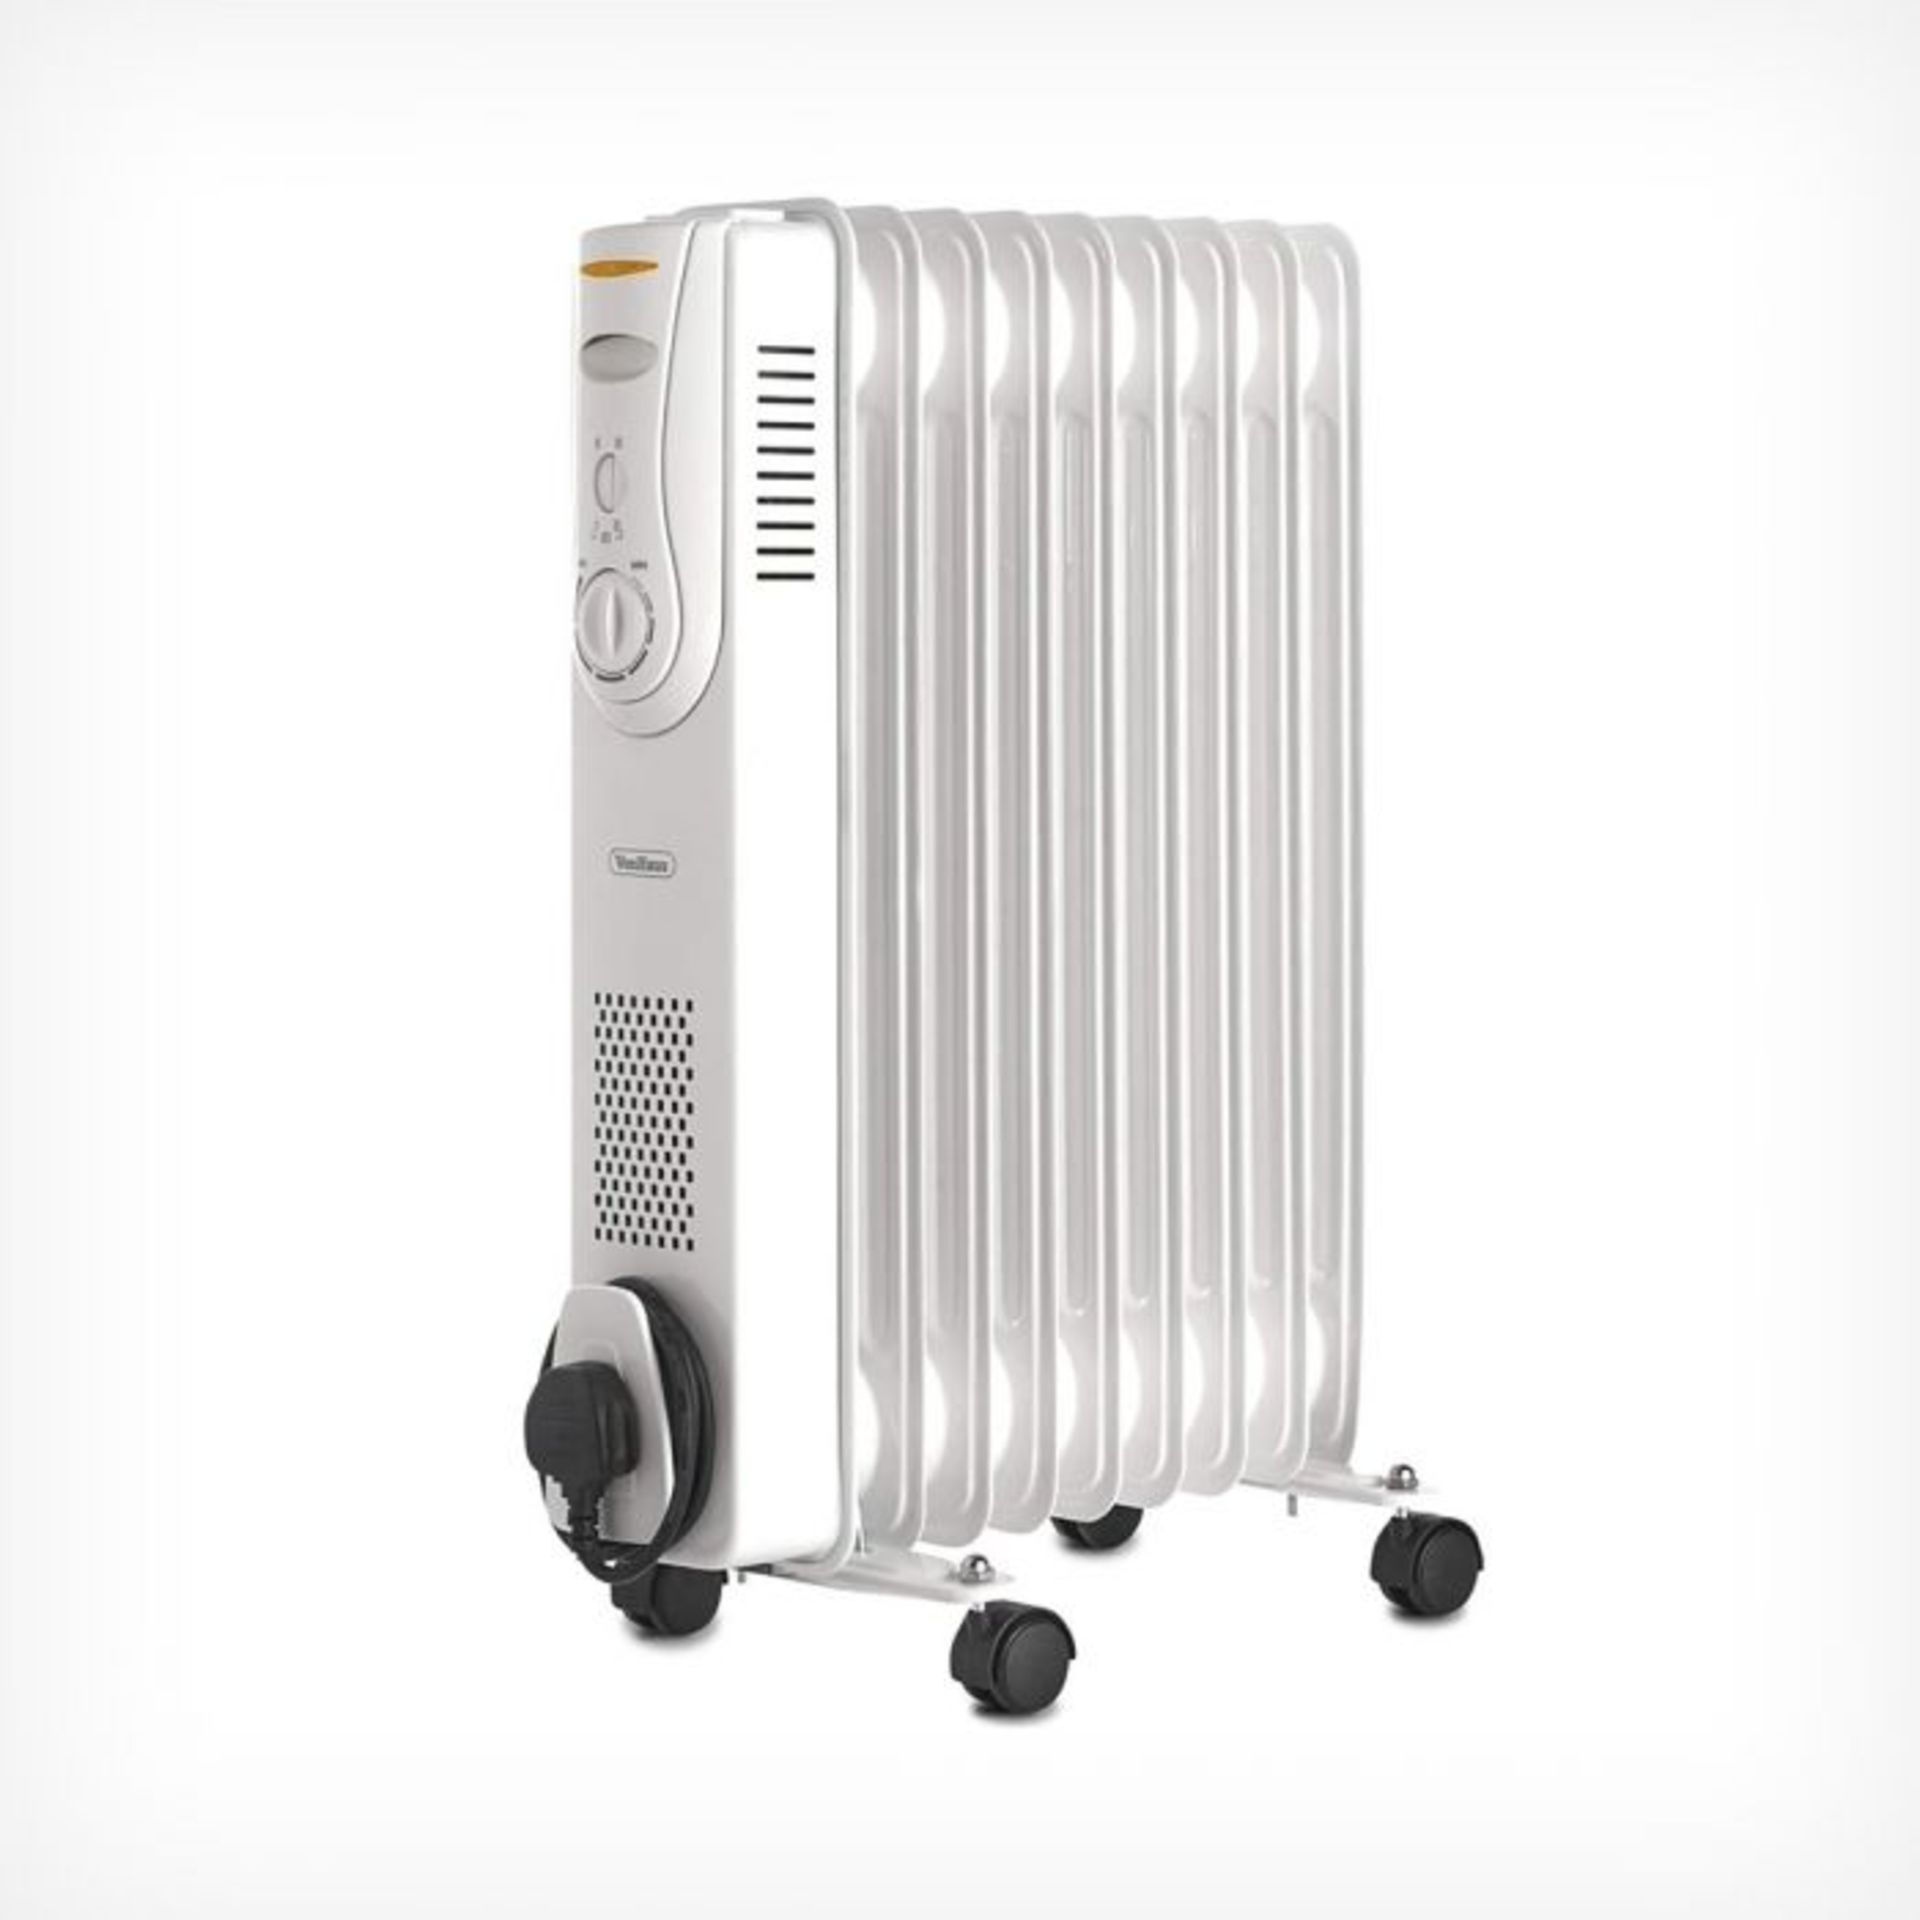 (V129) 9 Fin 2000W Oil Filled Radiator - White Powerful 2000W radiator with 9 oil-filled fins ... - Image 2 of 3